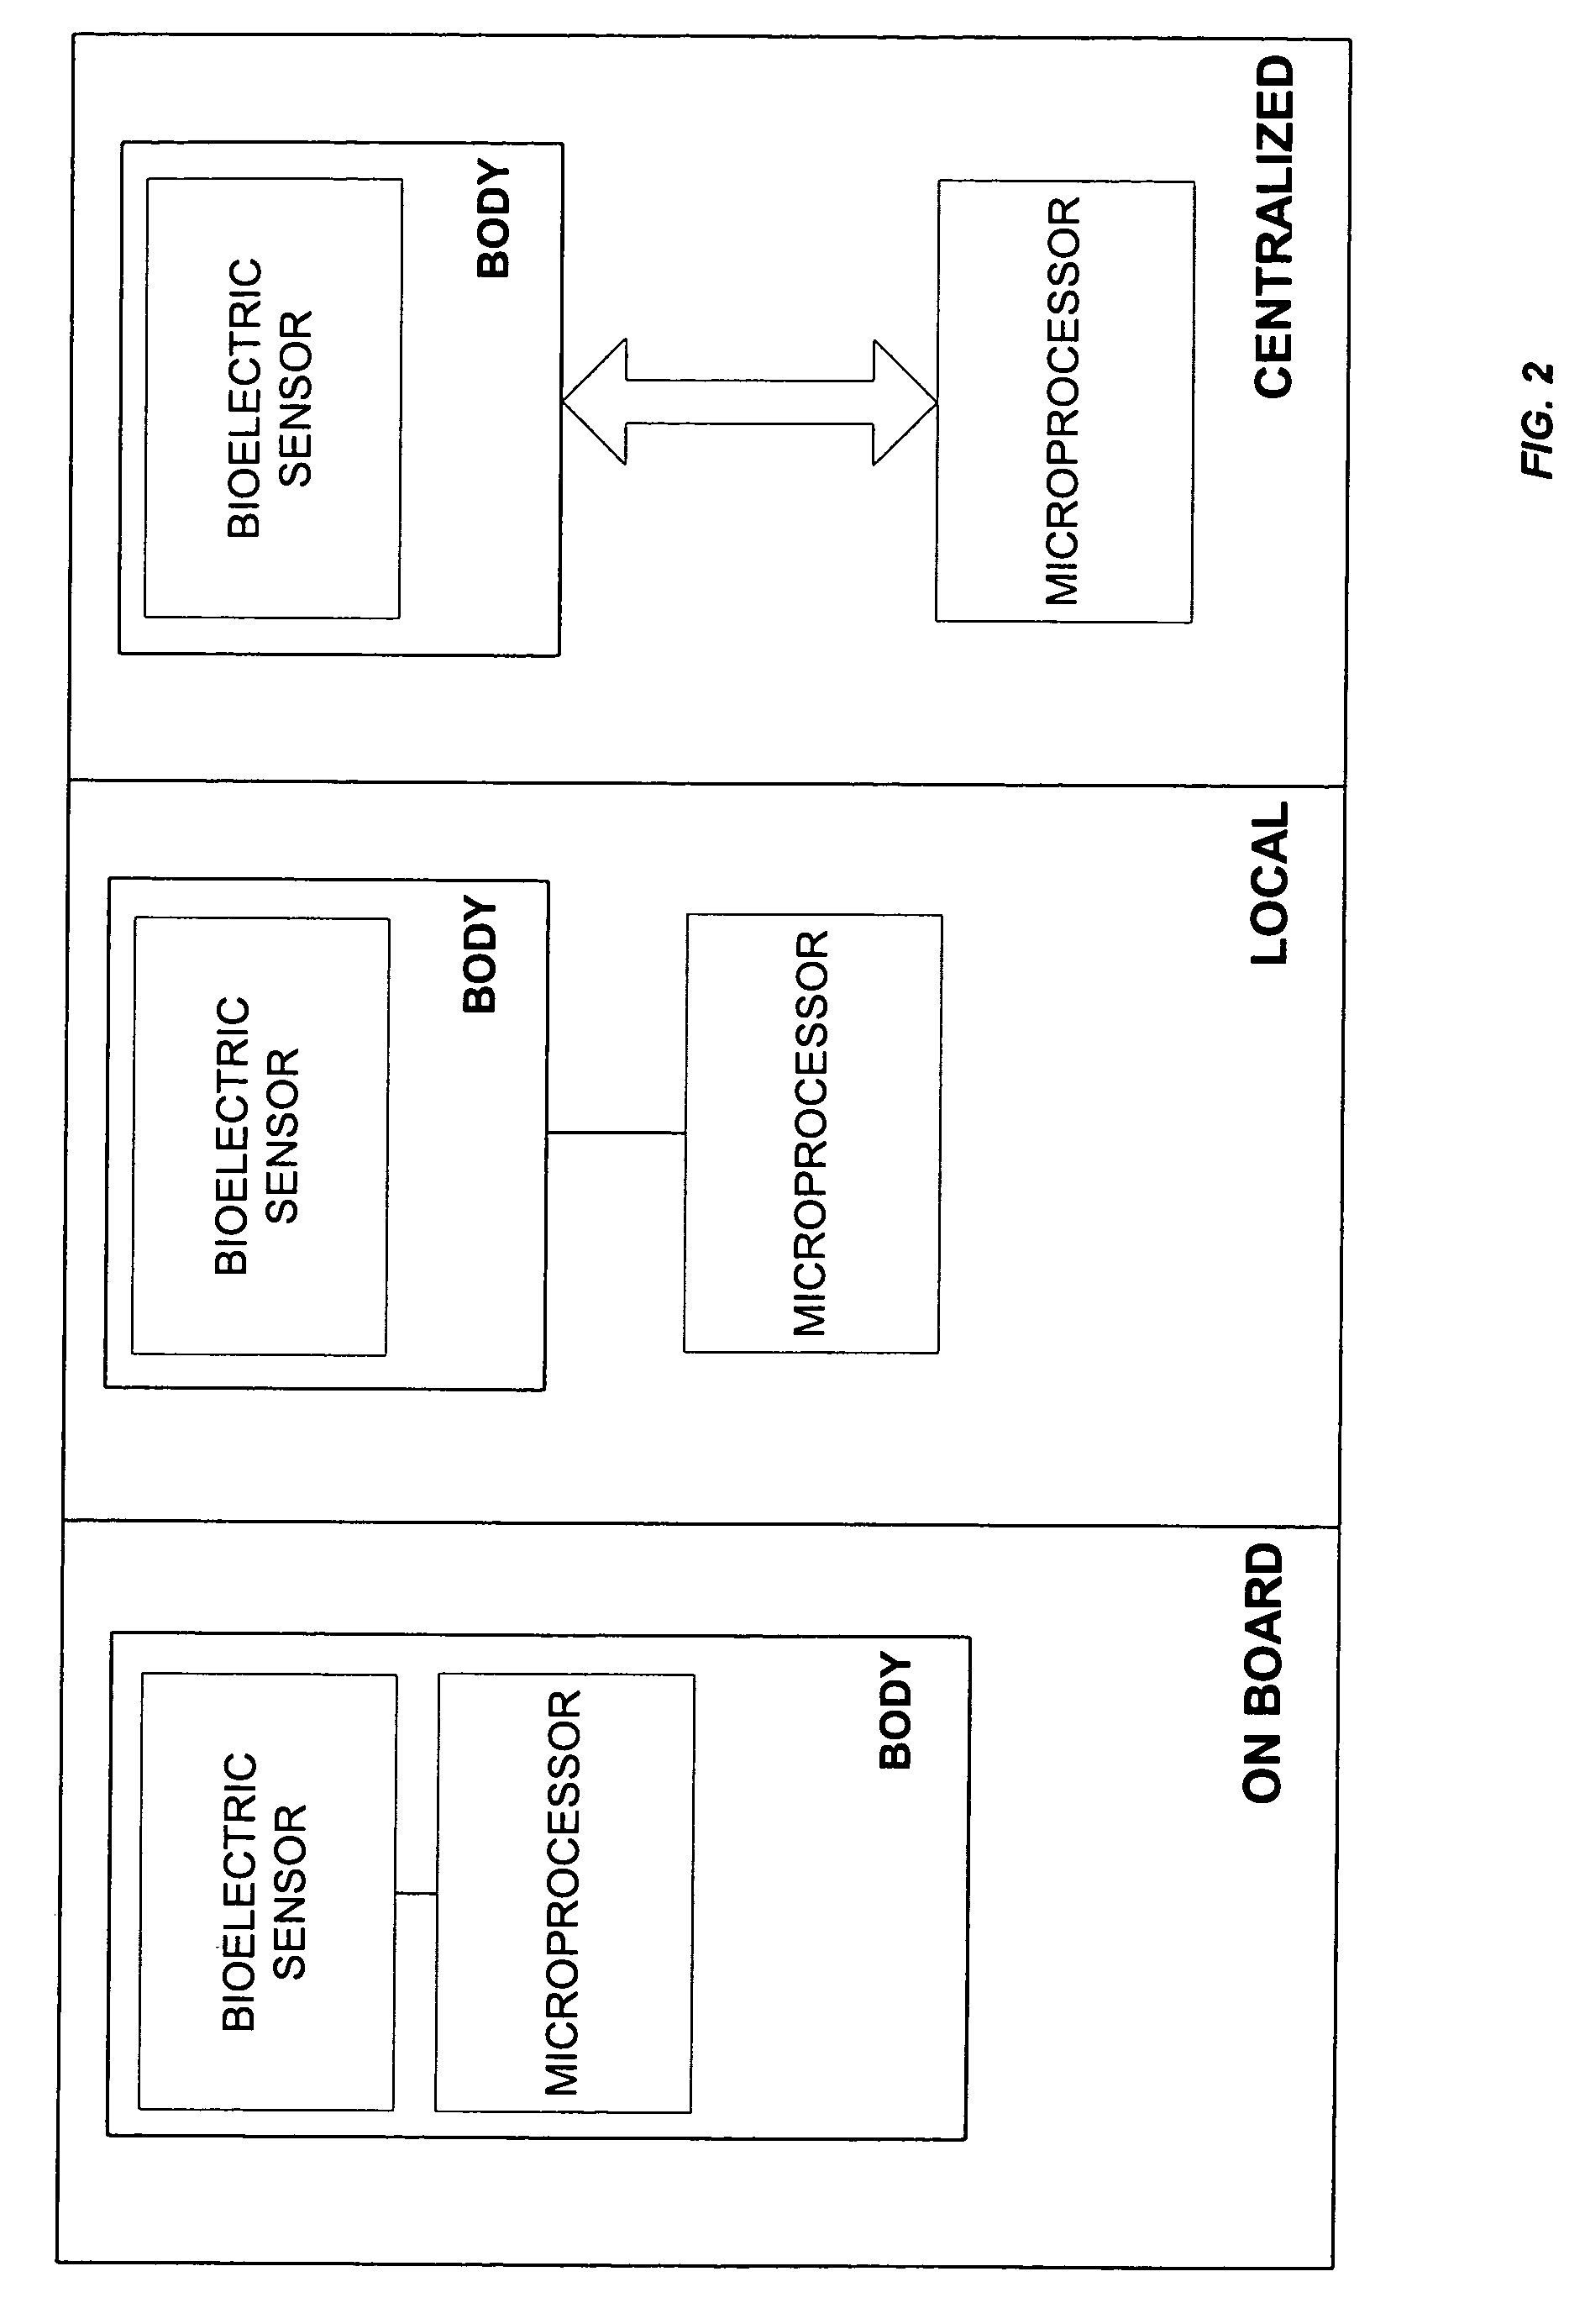 Method and system for predicting and preventing seizures